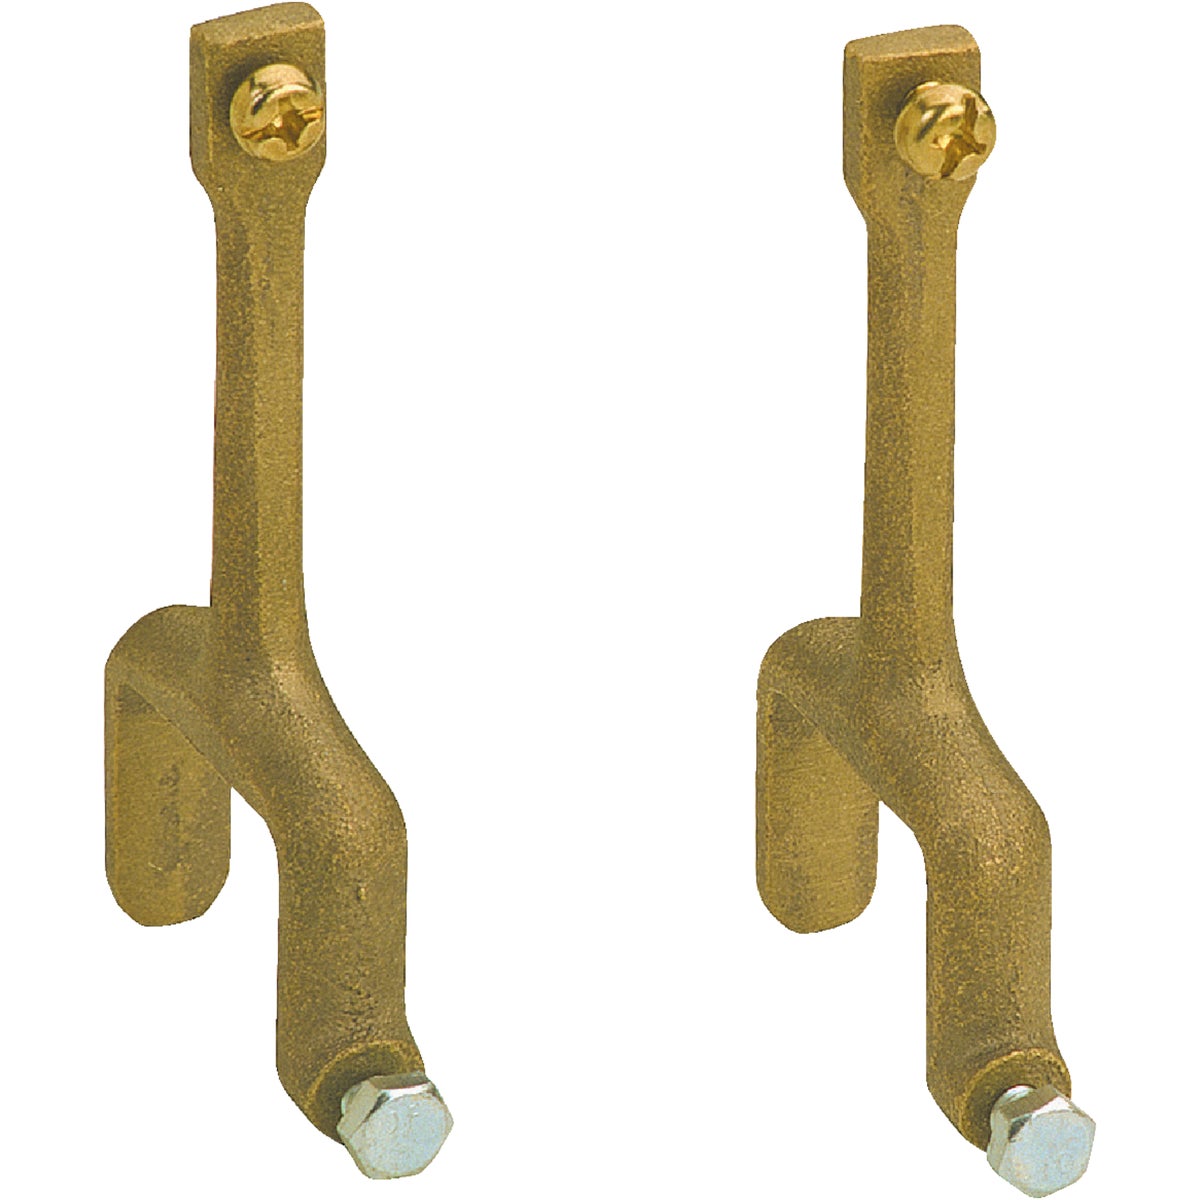 Item 467146, Straddle legs for mounting laundry faucet